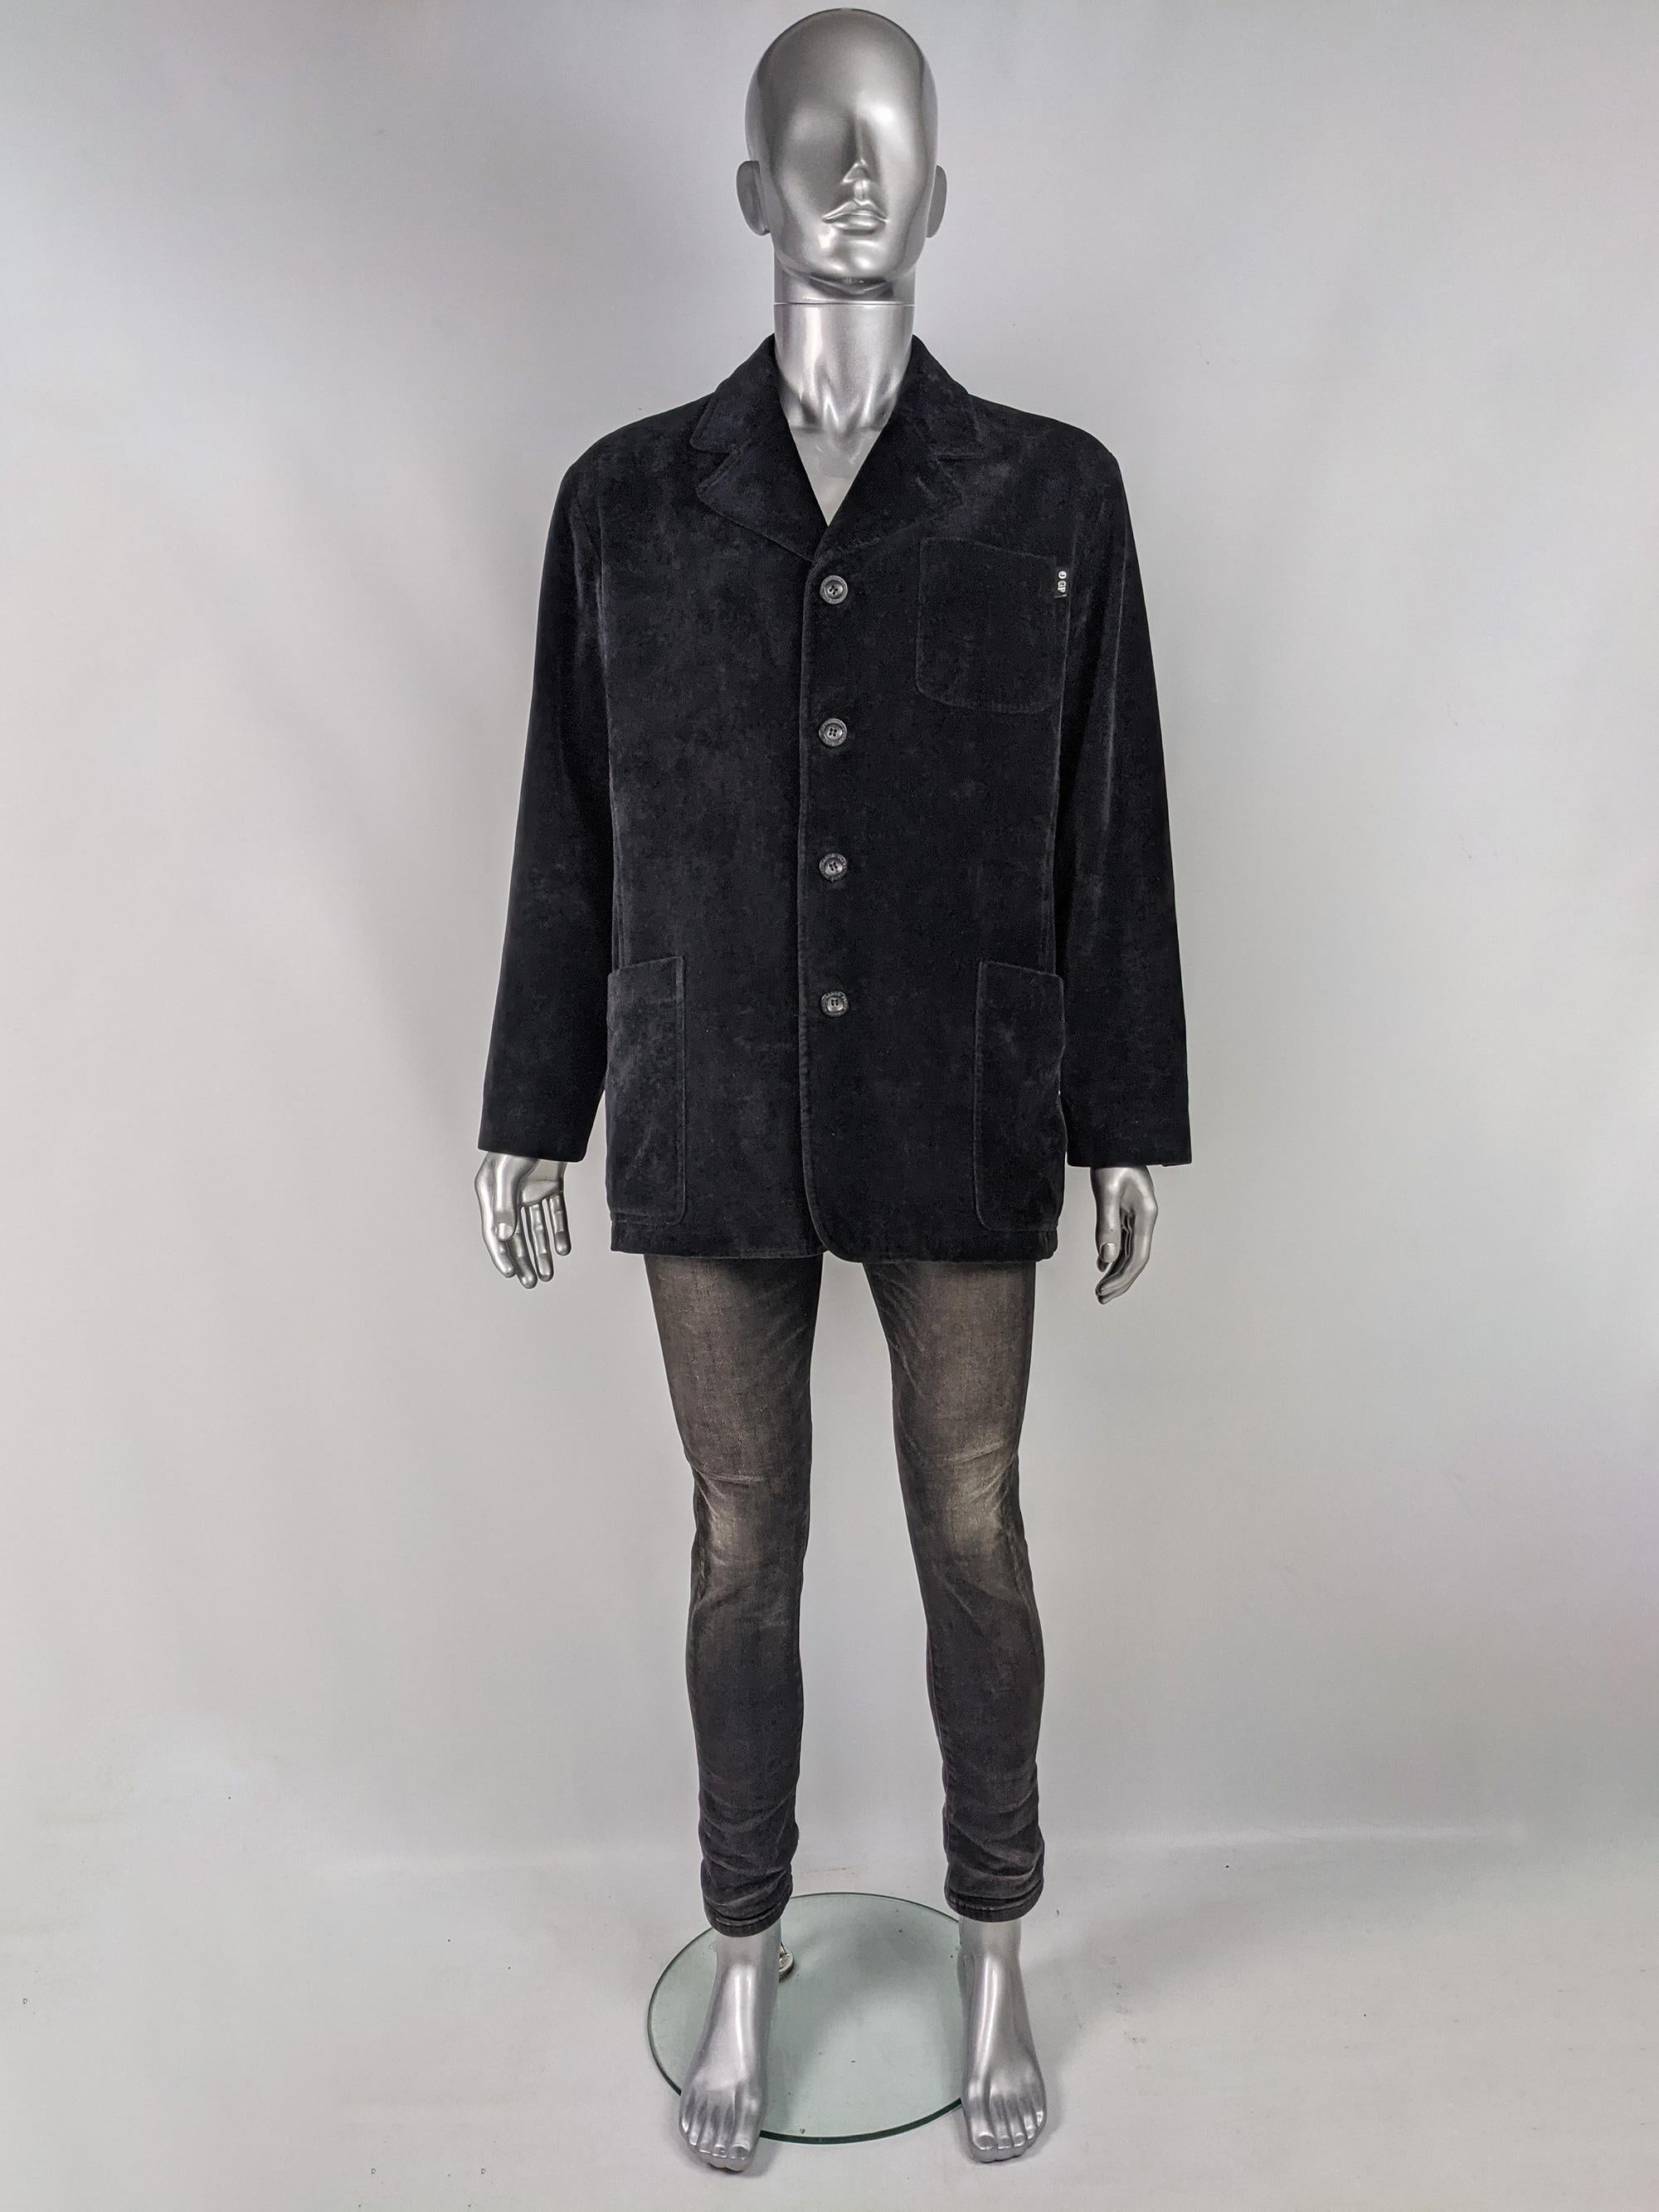 A stylish vintage mens black velvet Gianfranco Ferré jacket from the 90s. In a black velvet with four single breasted buttons for a classic look.

Size: Marked IT 50 which equates to a mens Large. Please check measurements. 
Chest - 44” / 112cm